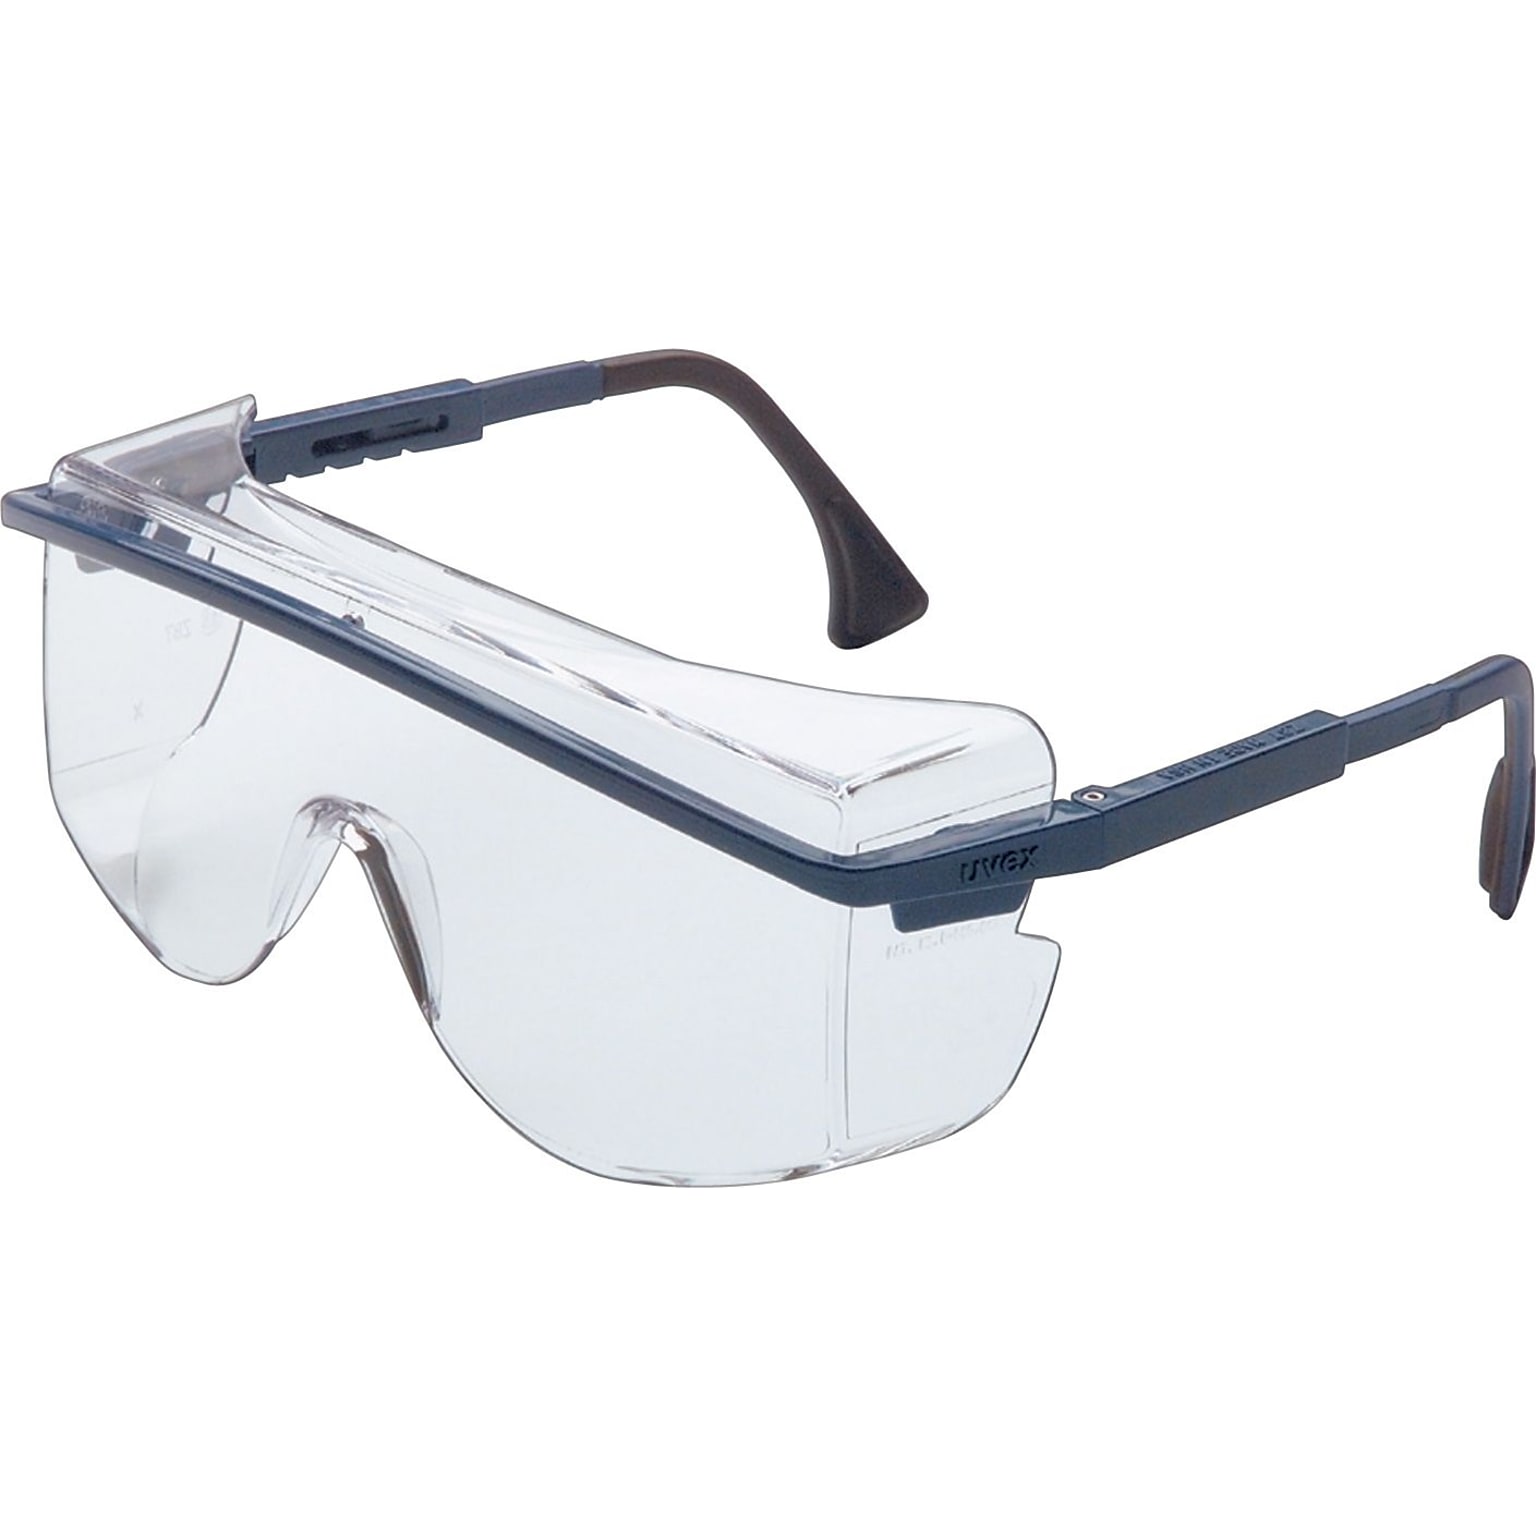 Sperian Astrospec OTG® Safety Spectacle, Polycarbonate, Adjustable Temples, Clear, Black